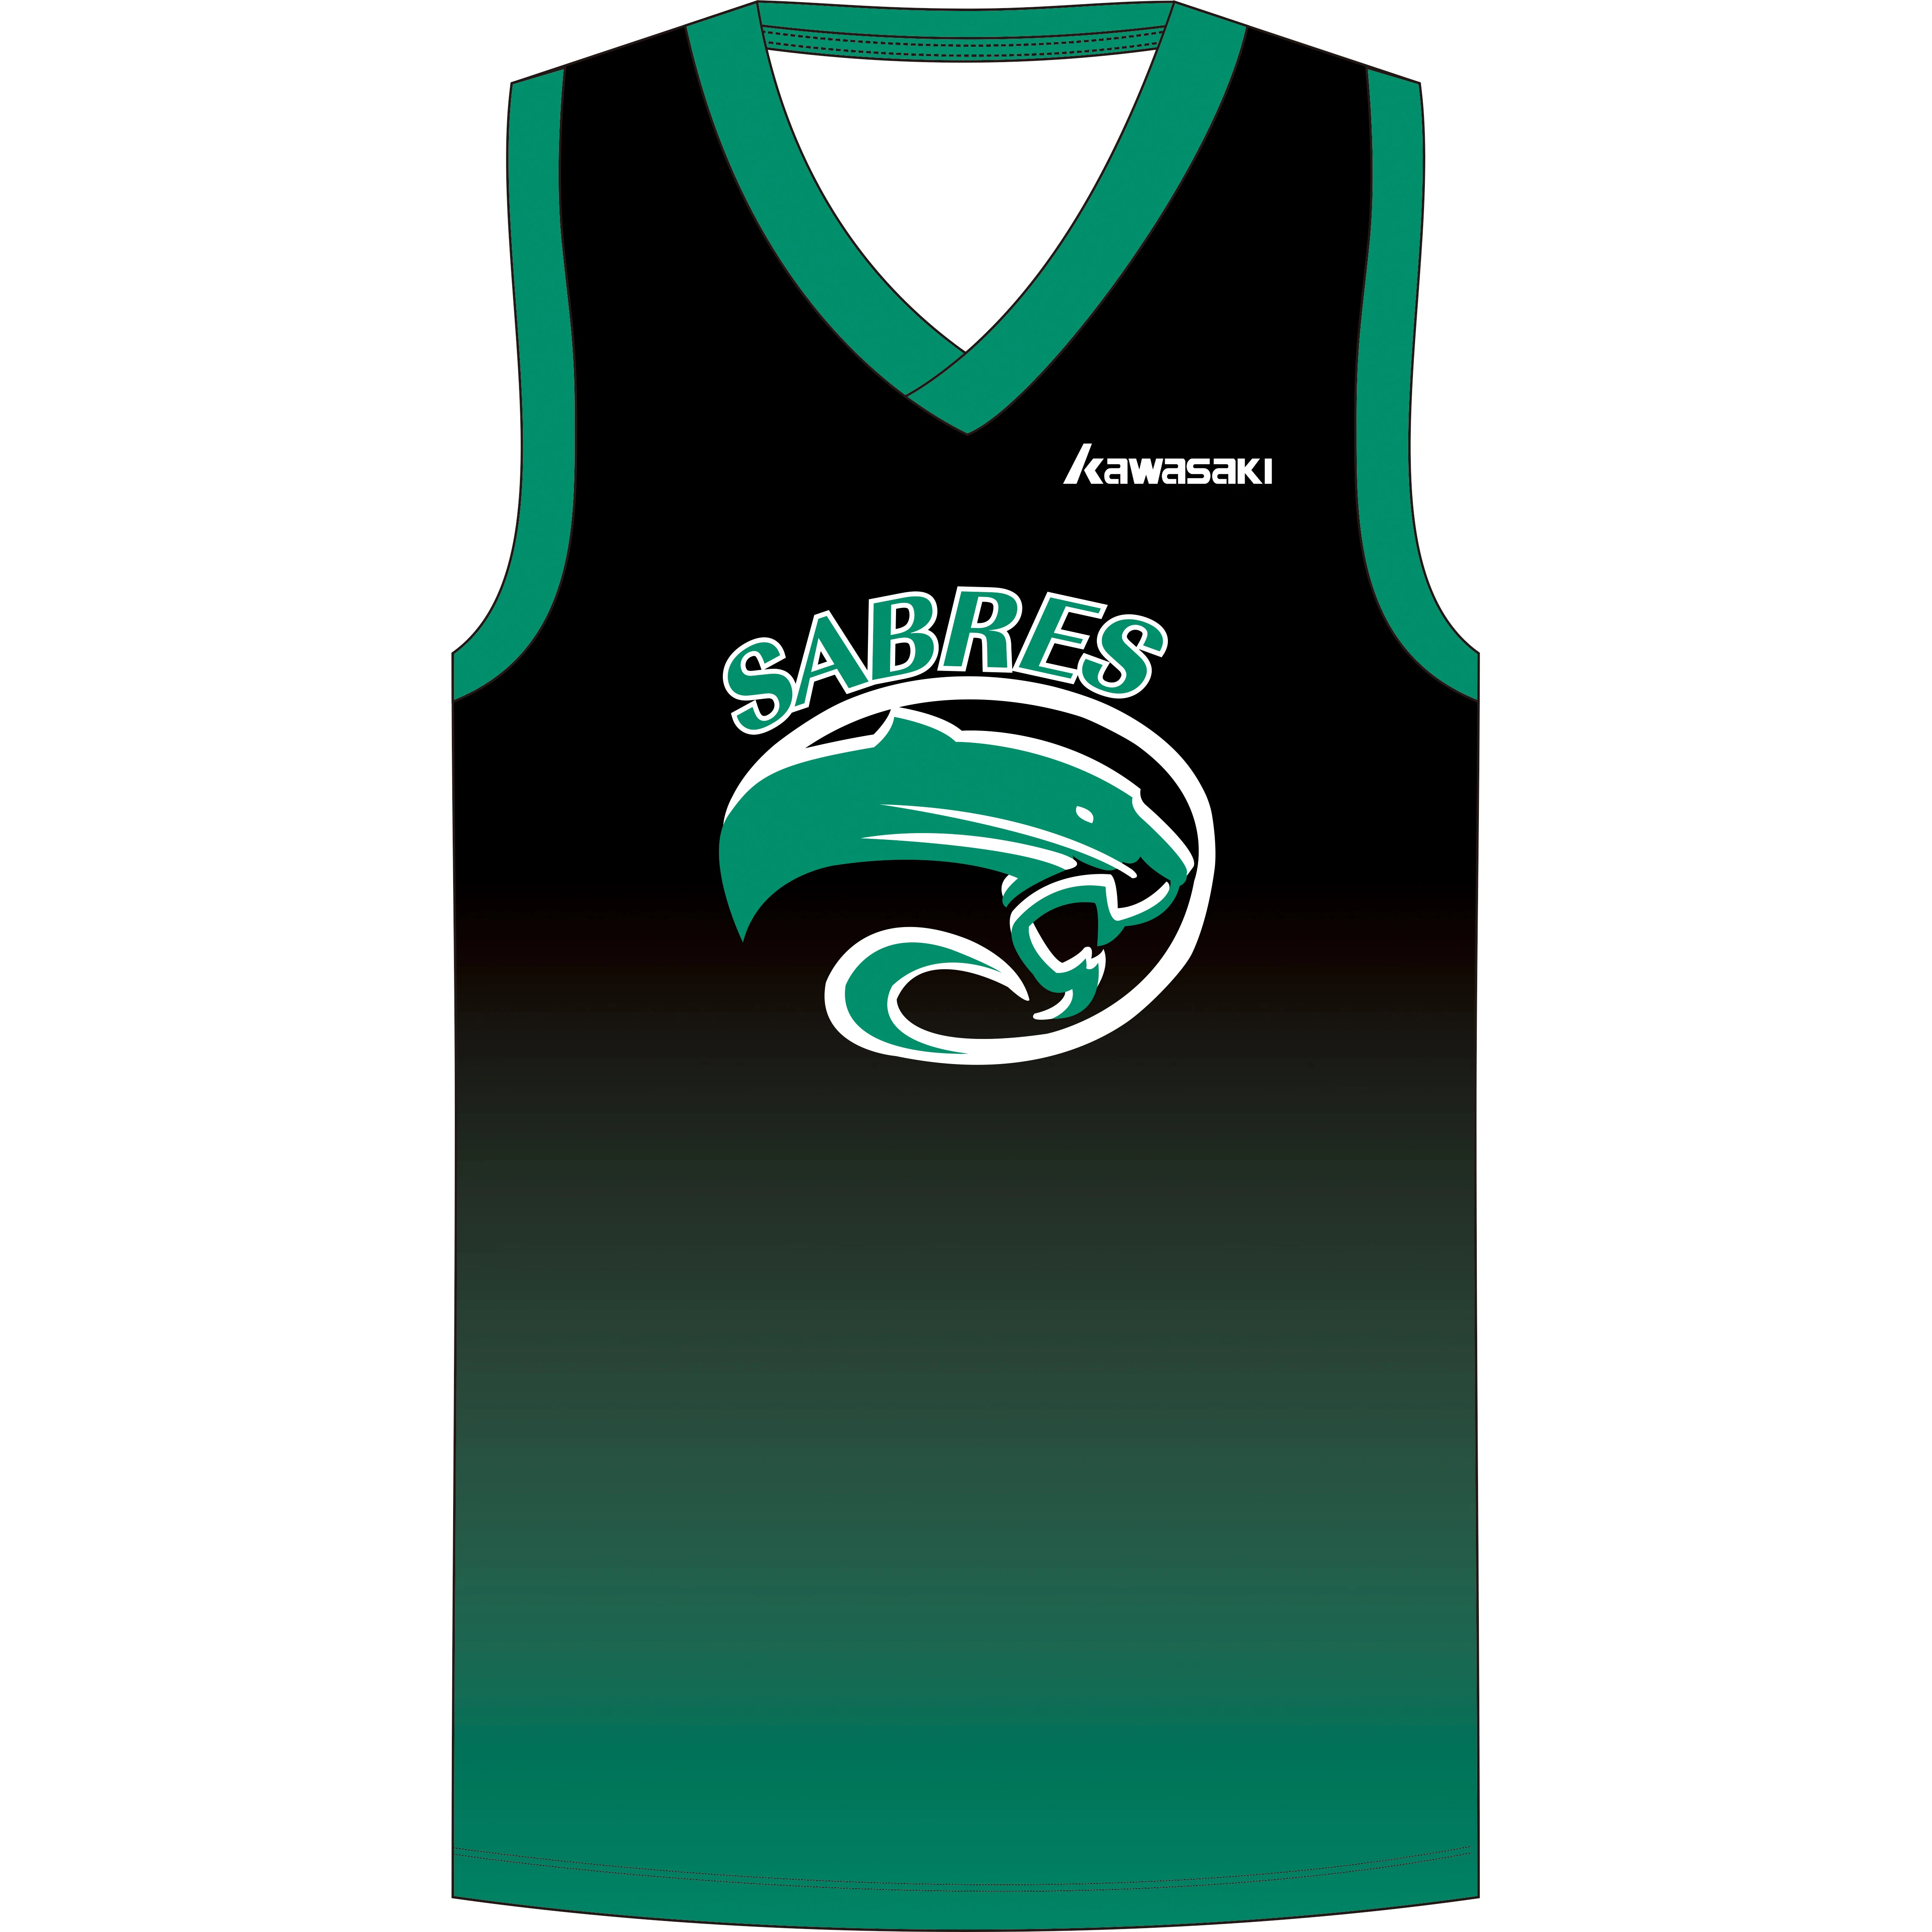 basketball jersey color green